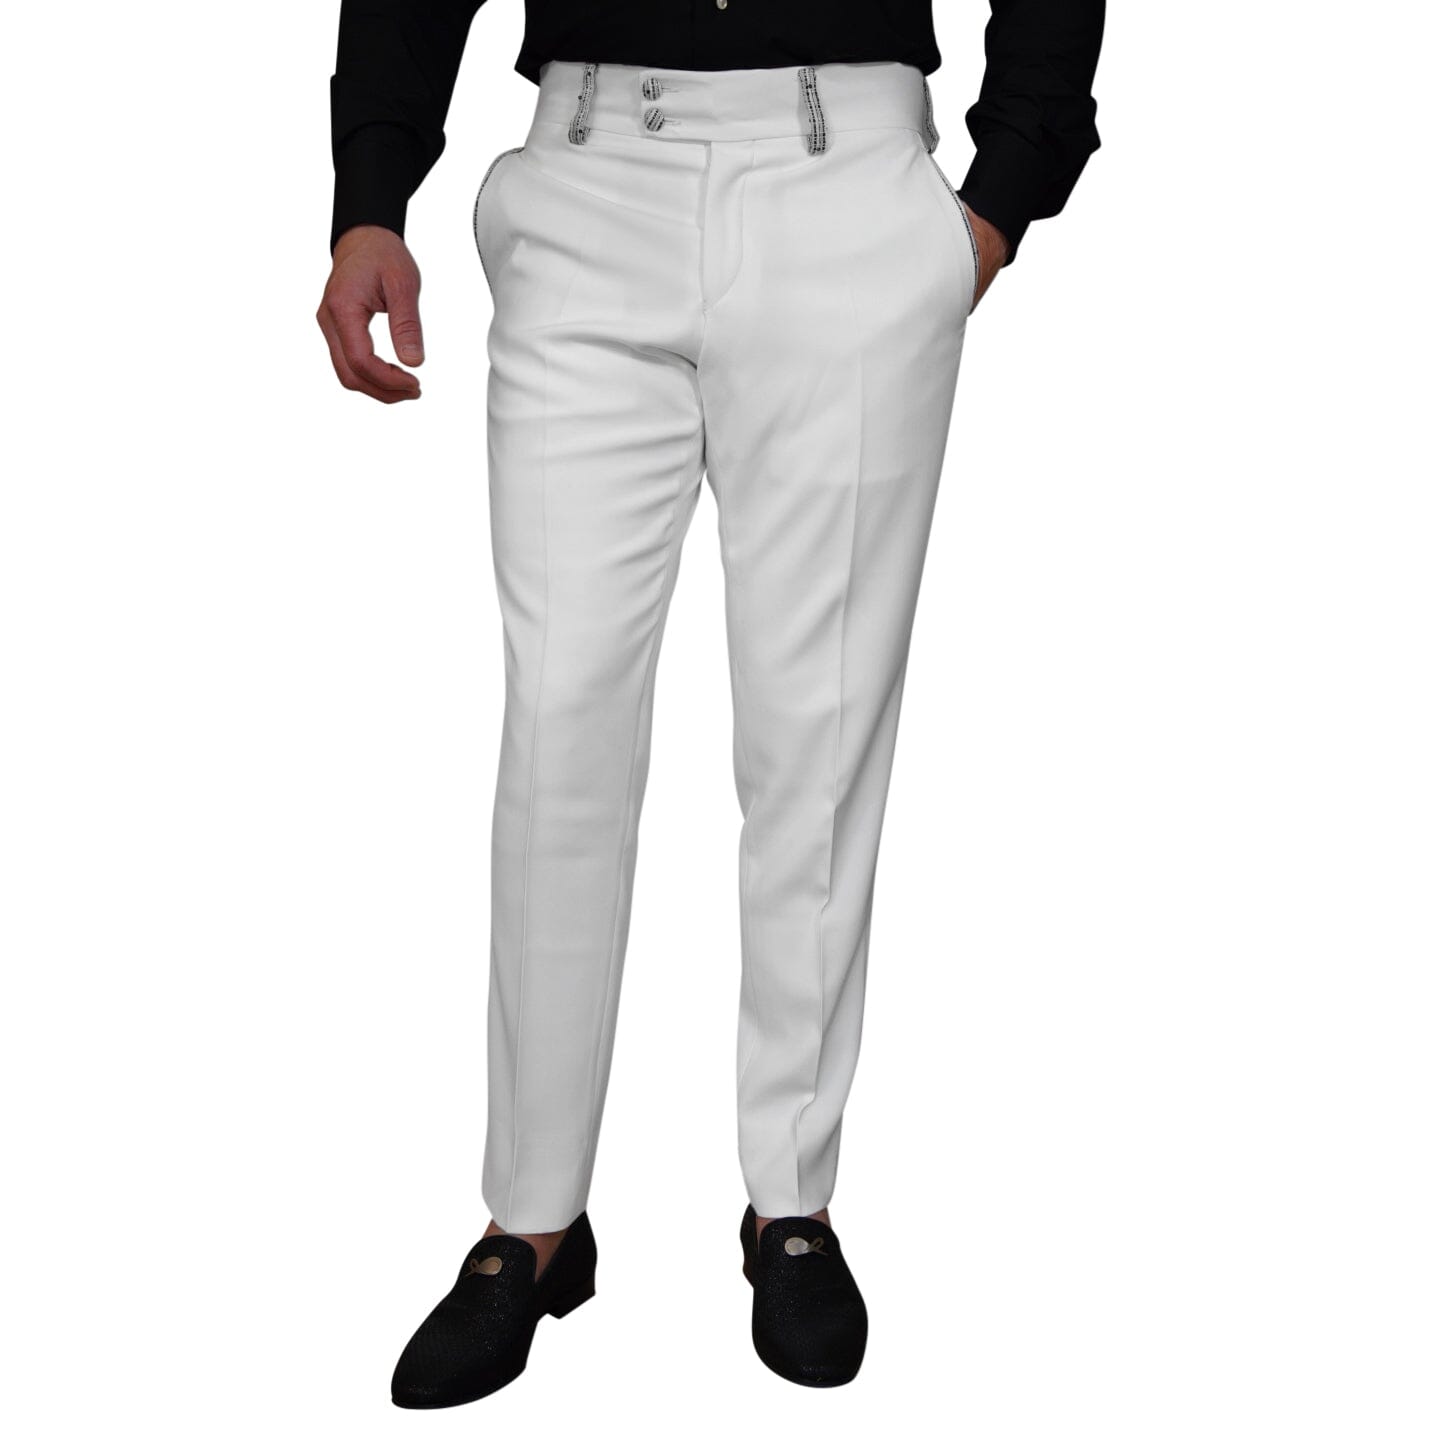 Bianco Tweed Paillette Trousers